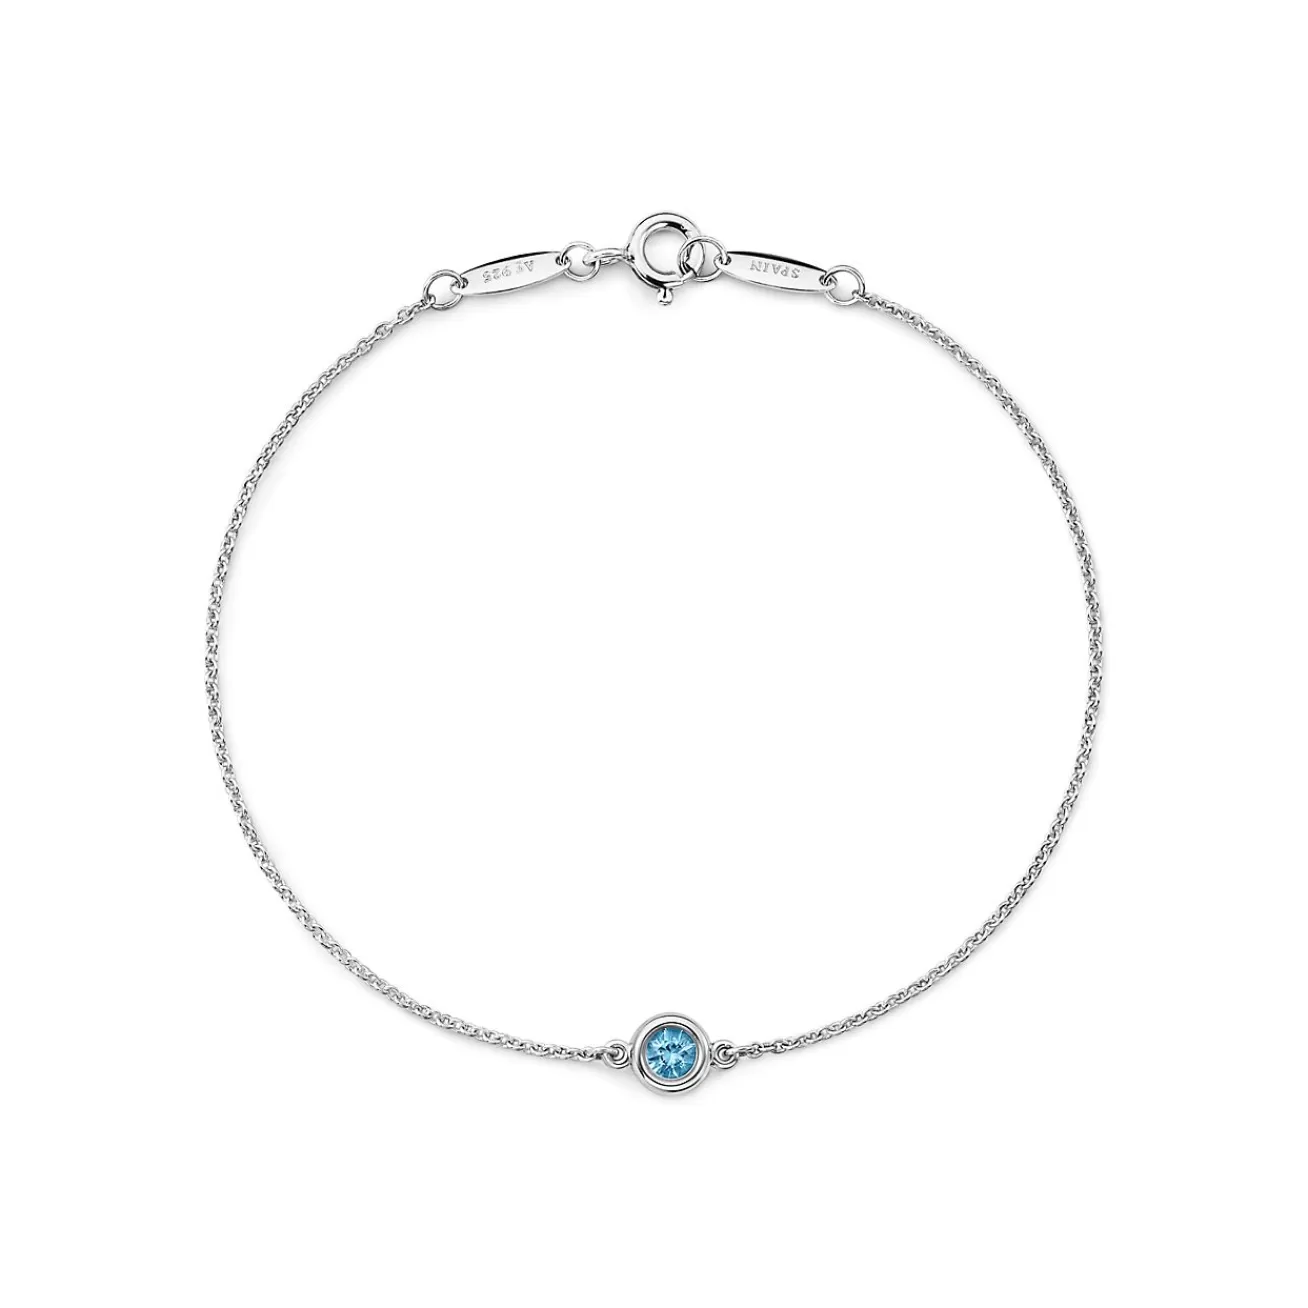 Tiffany & Co. Elsa Peretti® Color by the Yard bracelet in sterling silver with an aquamarine. | ^ Bracelets | Sterling Silver Jewelry